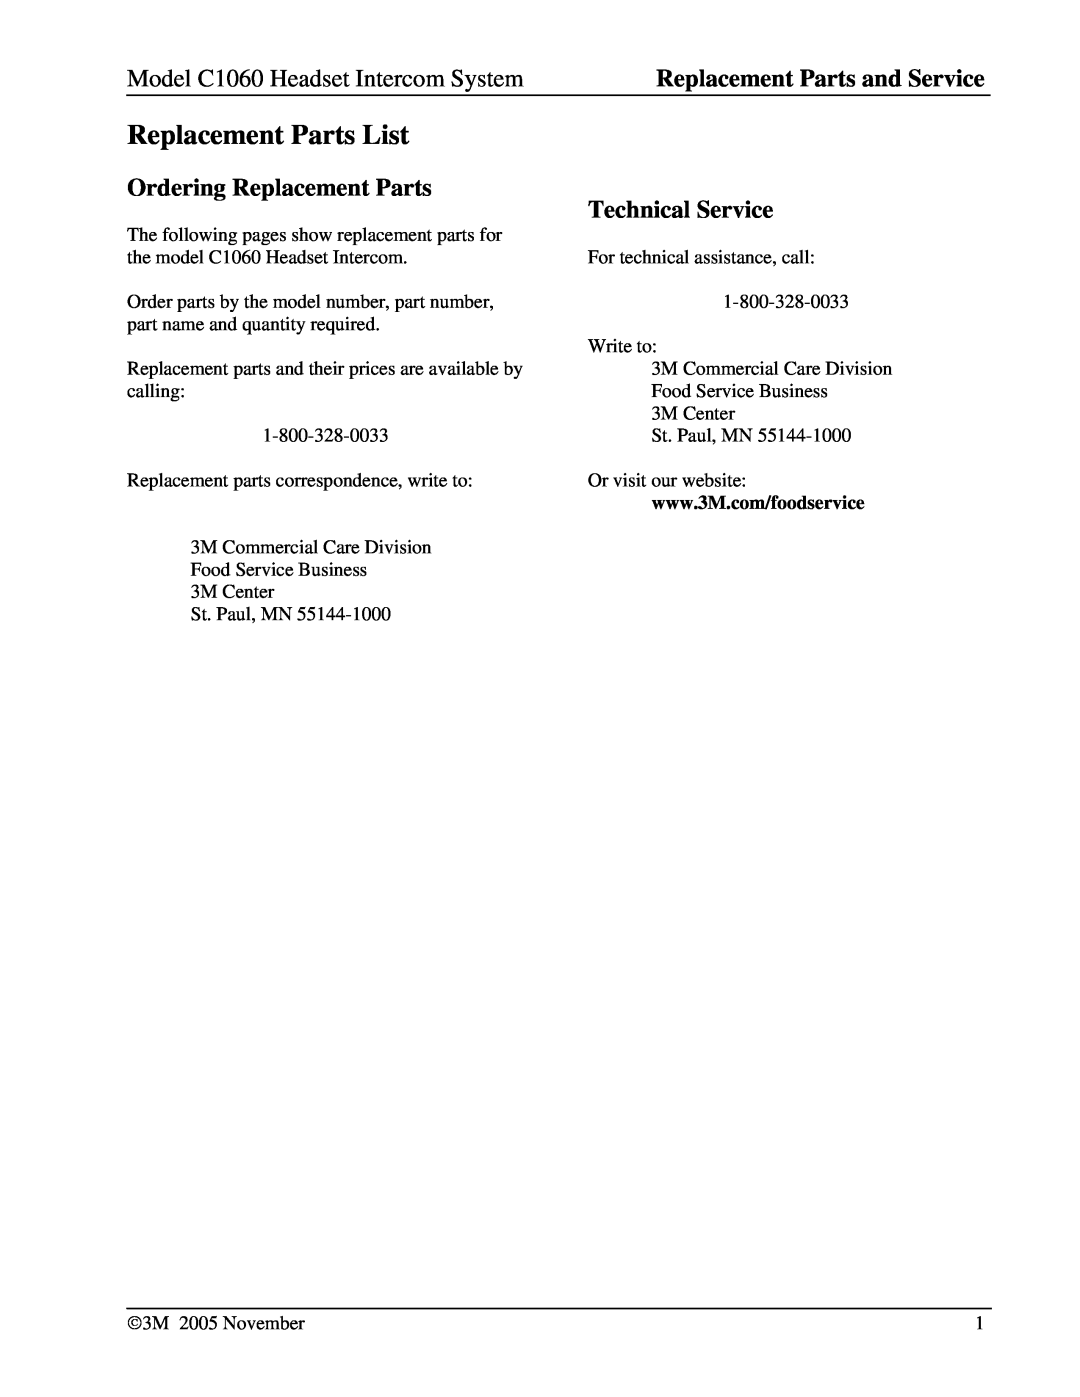 3M C1060 manual Replacement Parts List, Ordering Replacement Parts, Technical Service 